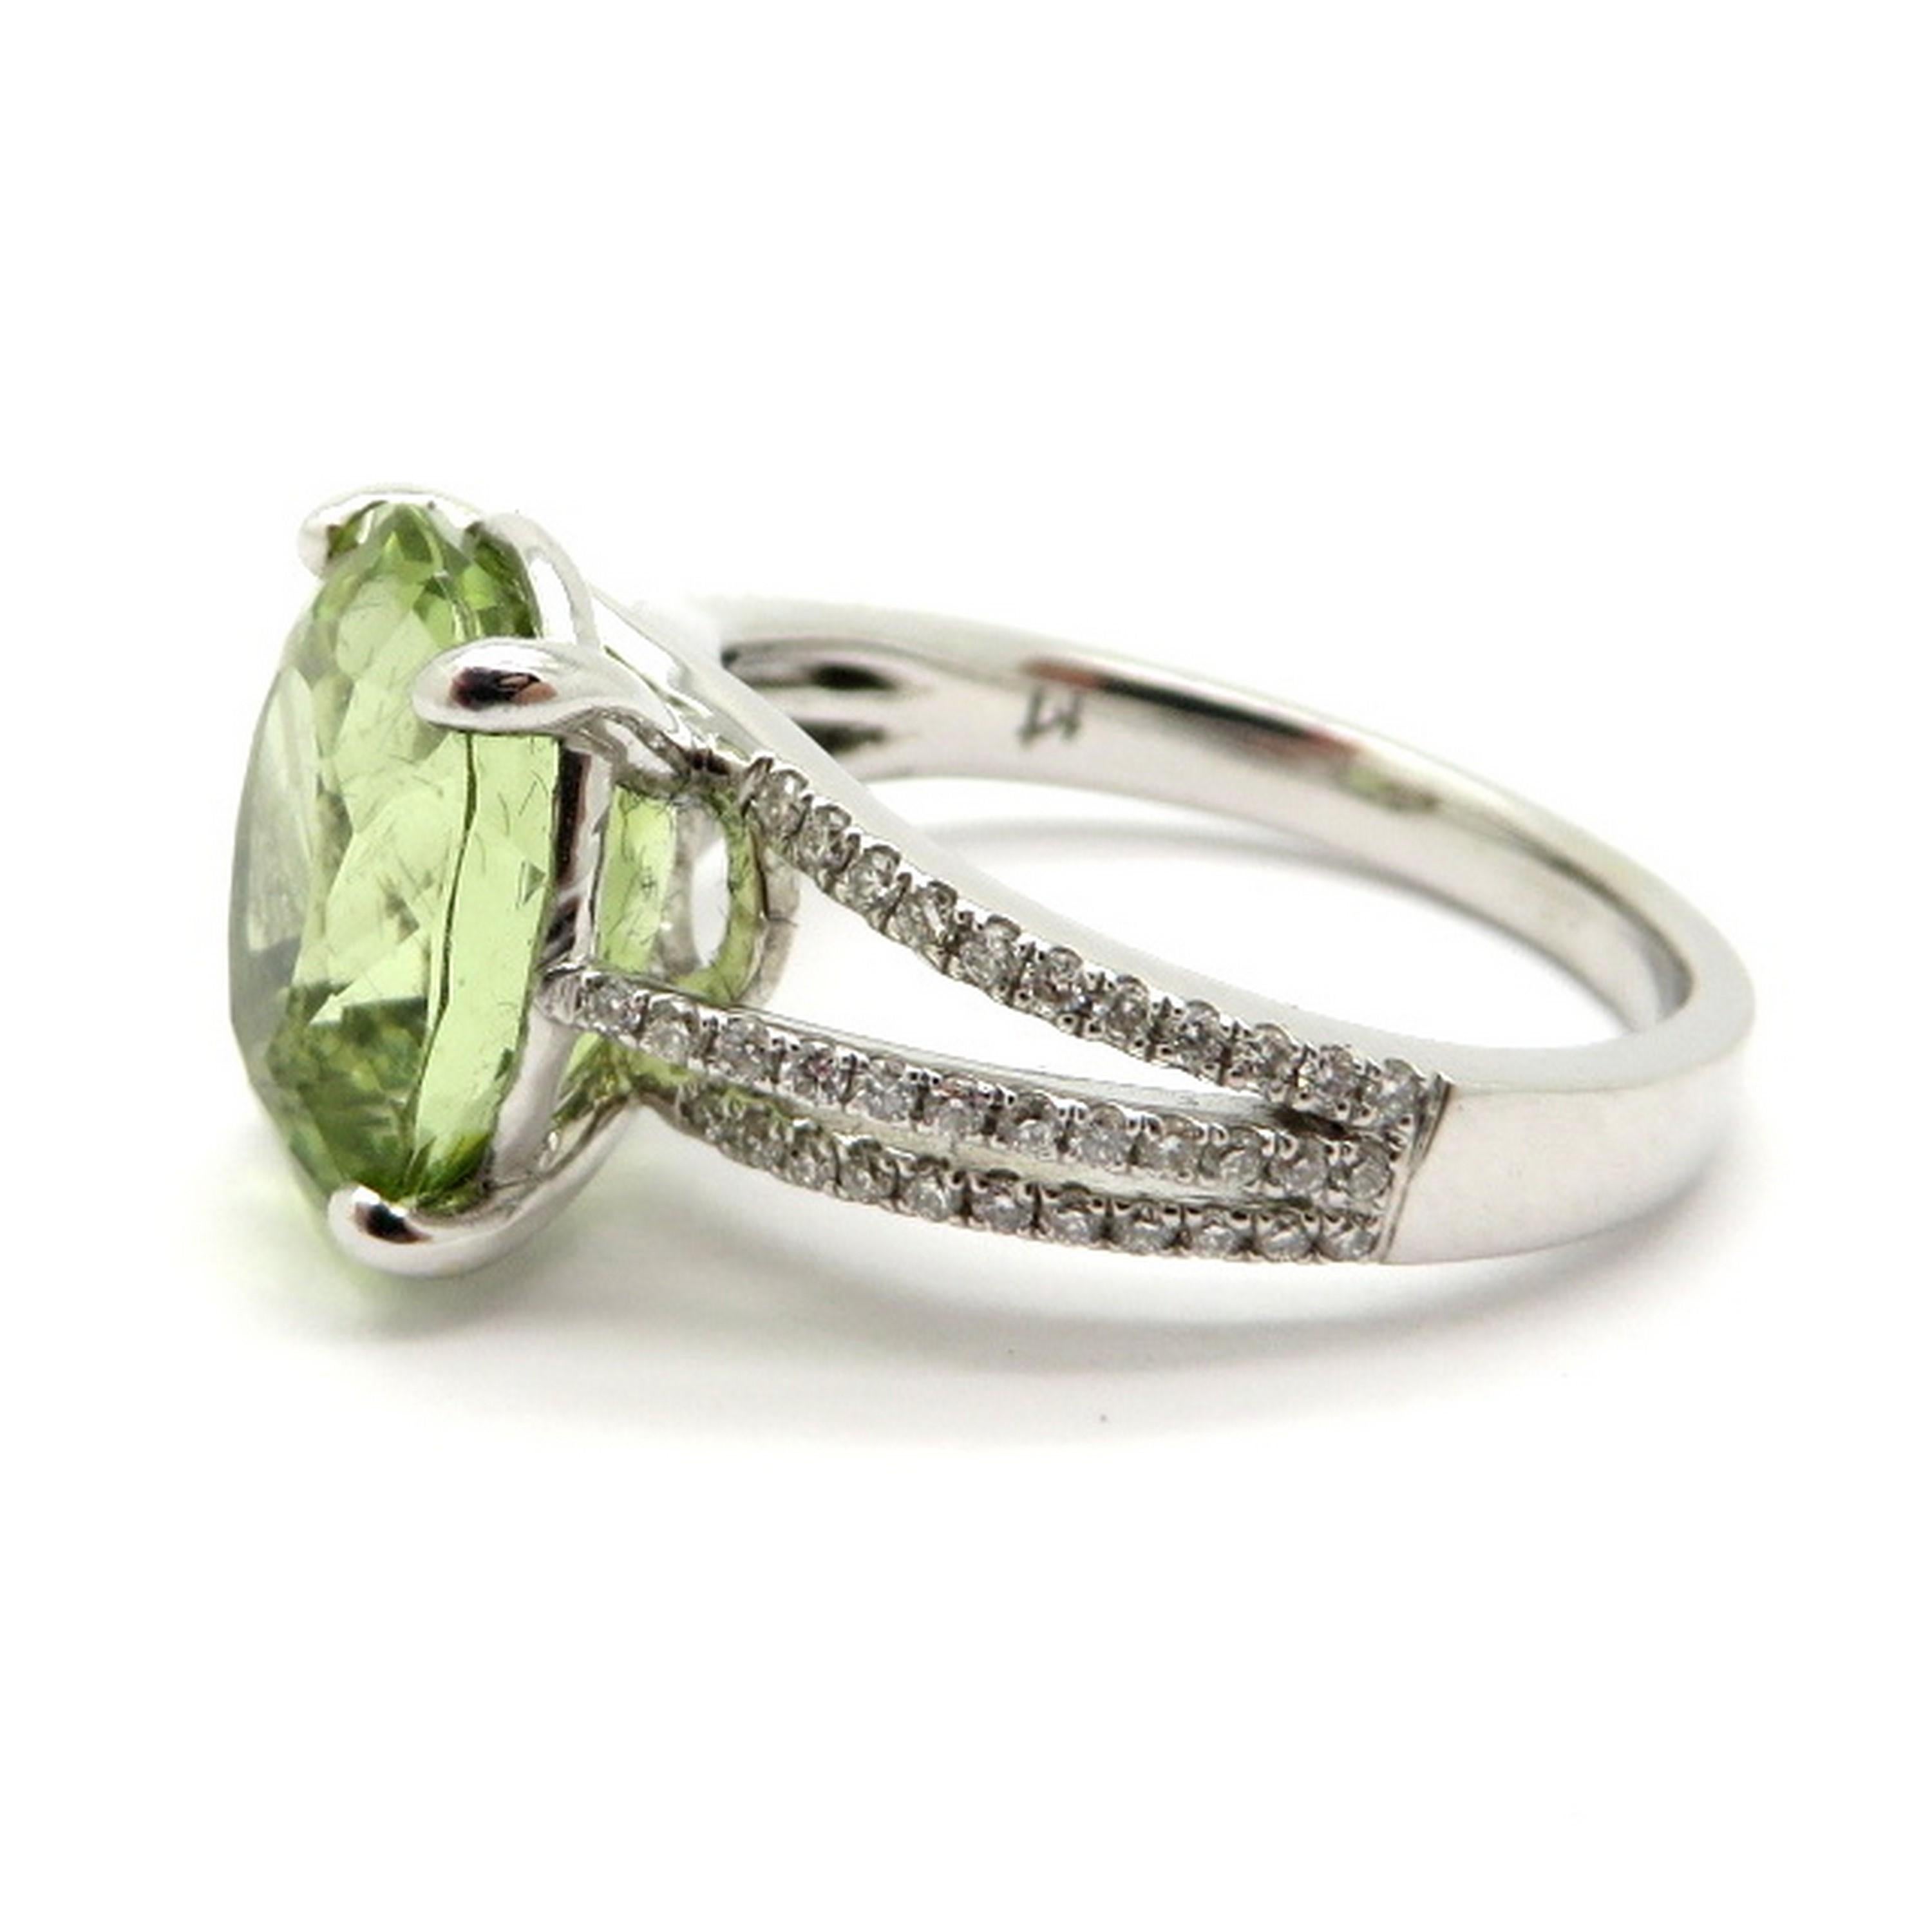 Estate 18K white gold light green beryl and diamond fashion ring. Showcasing one oval brilliant cut light green beryl, four prong set, weighing approximately 4.05 carats. Accented with 68 round brilliant cut diamonds, bead set, weighing